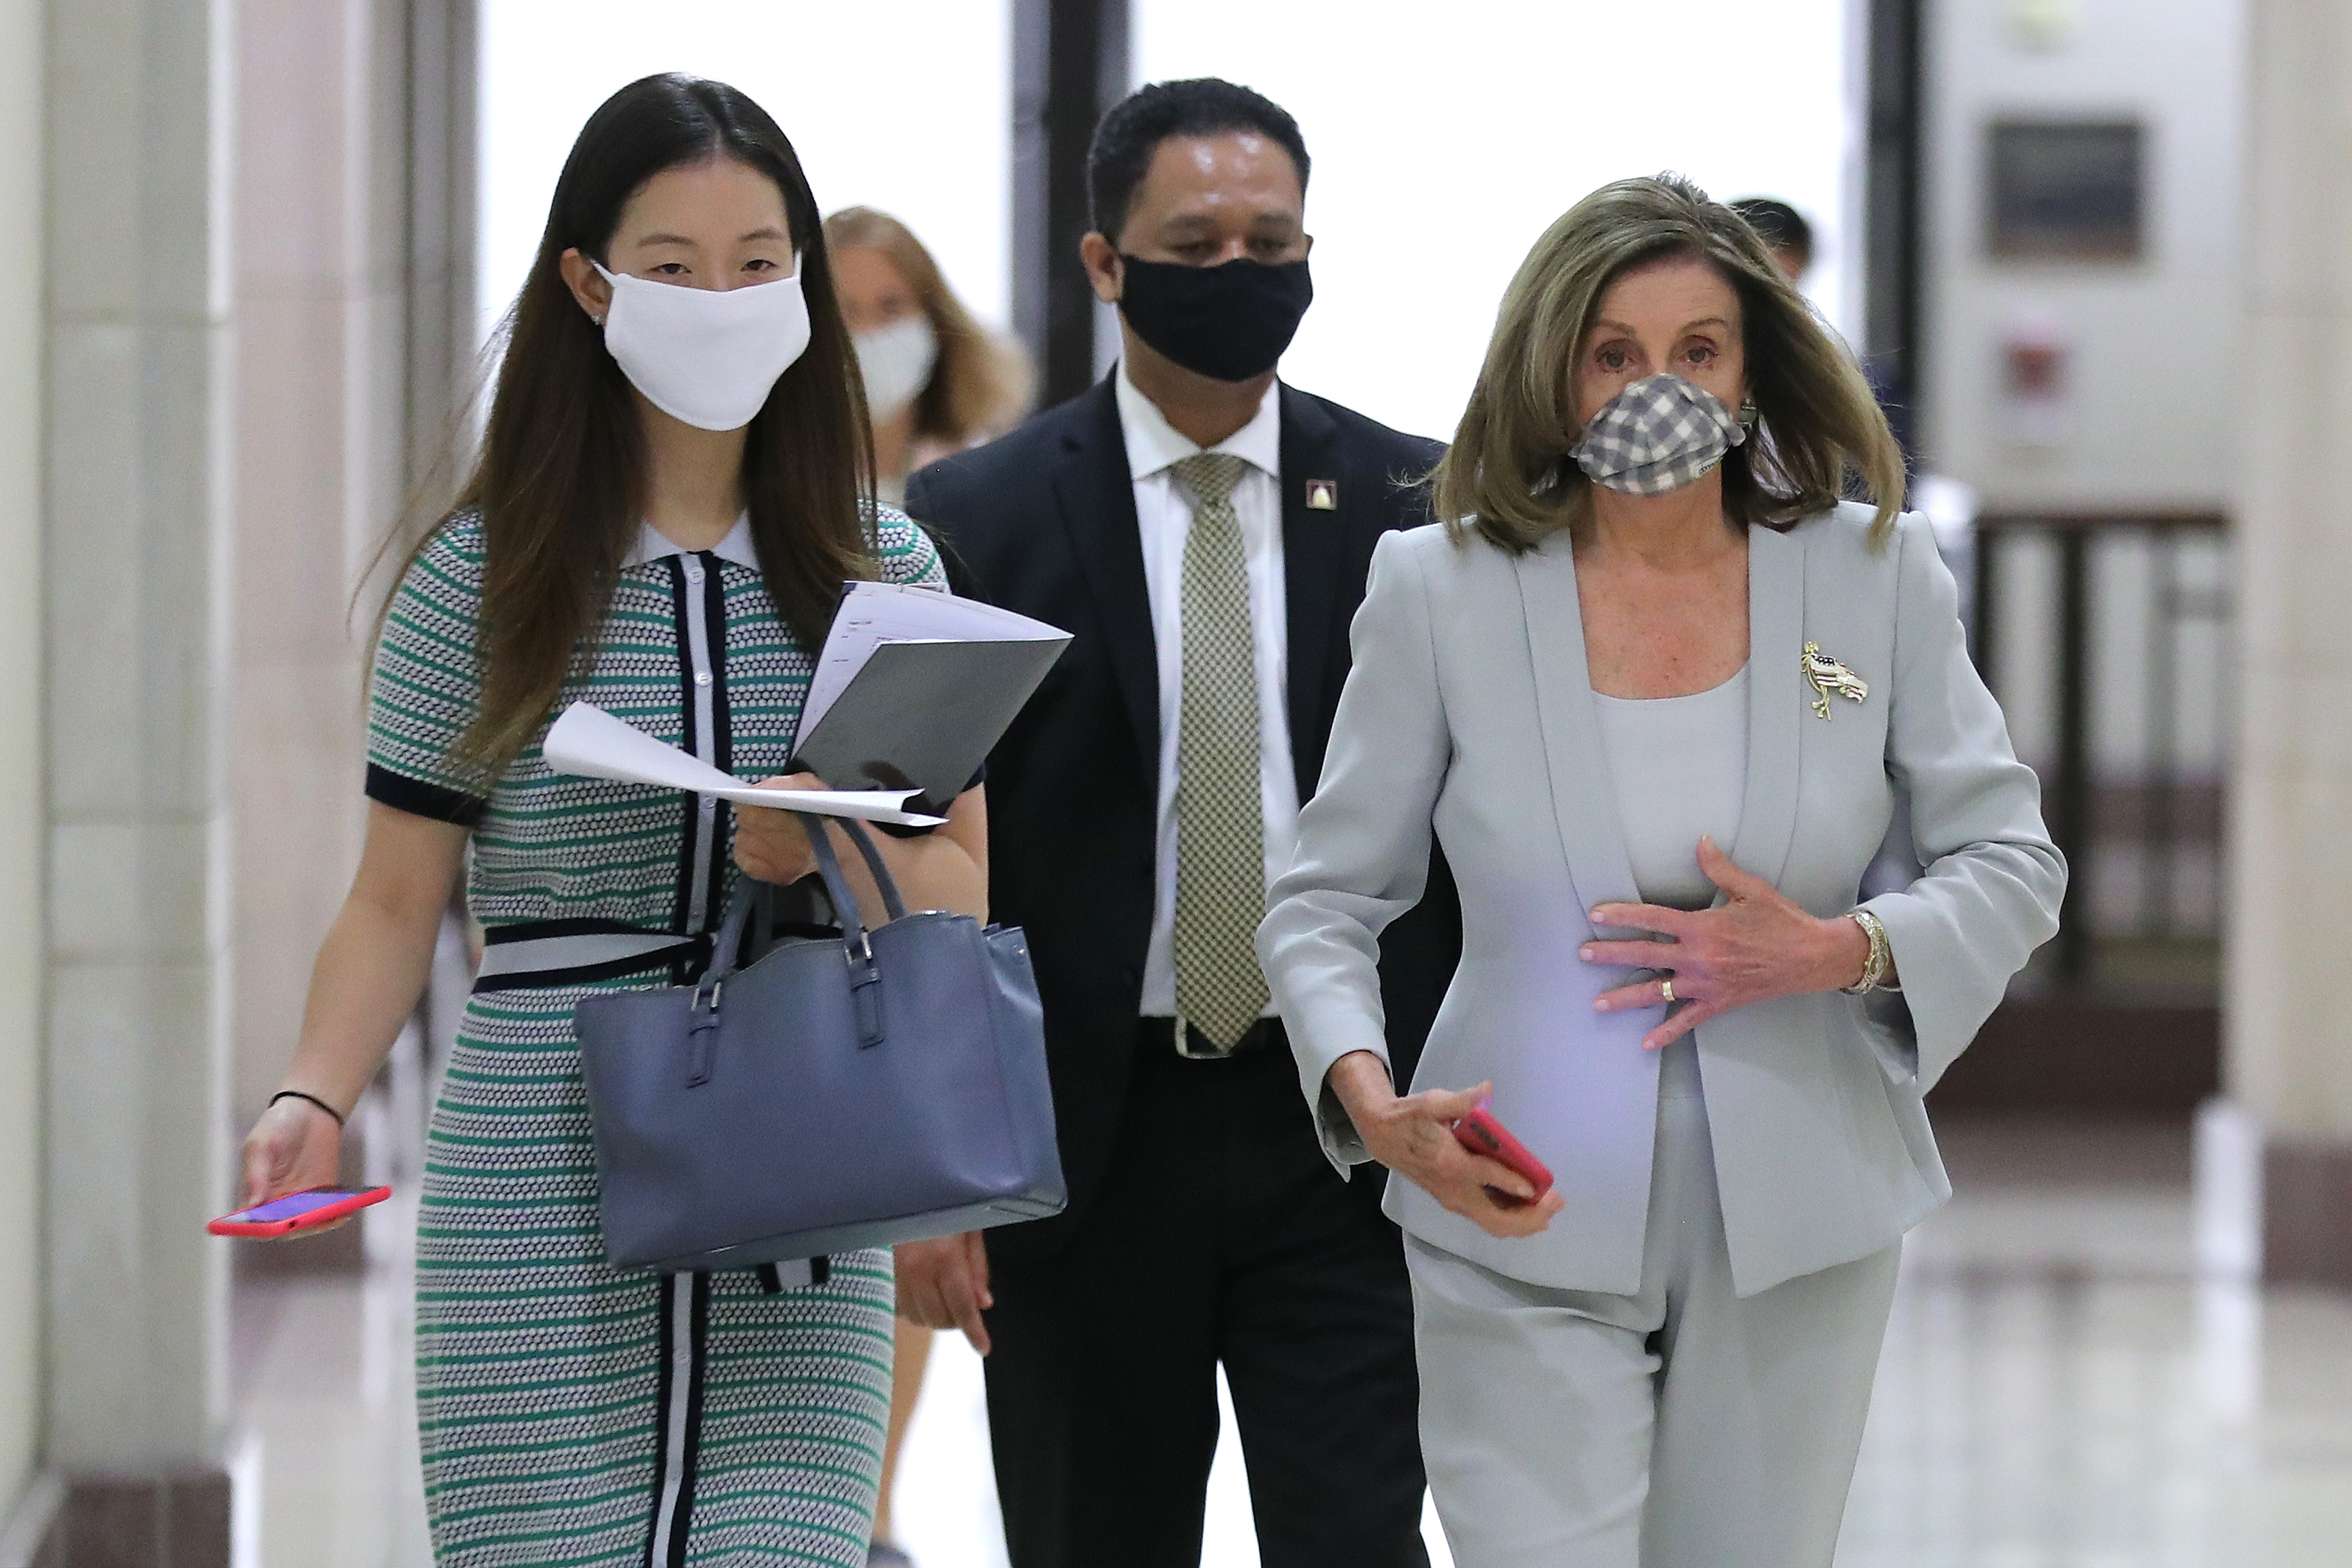 Speaker of the House Nancy Pelosi (D-CA) (R) returns to her office following a news conference in the U.S. Capitol Visitors Center August 13, 2020 in Washington, DC. (Chip Somodevilla/Getty Images)